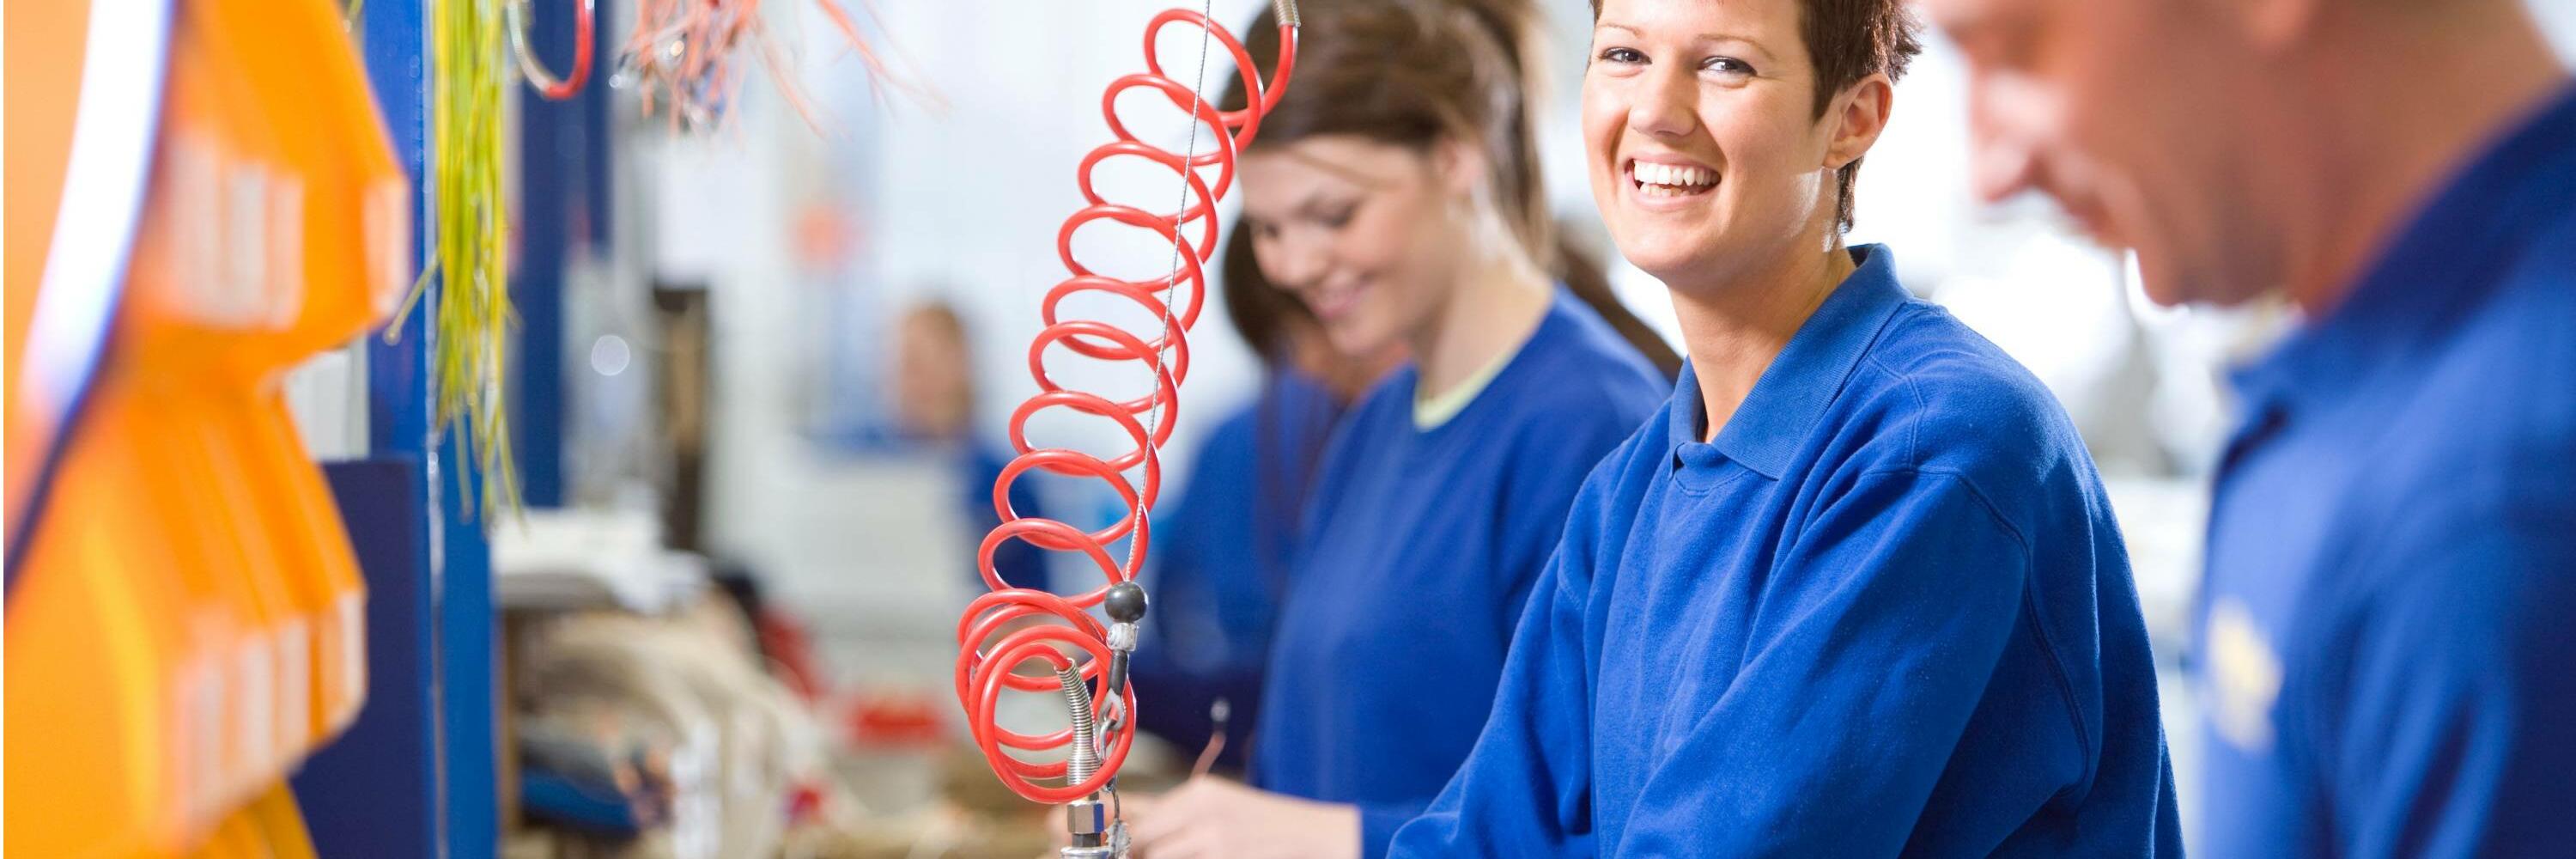 A woman in a blue work suit smiling while working with a red coil in a factory